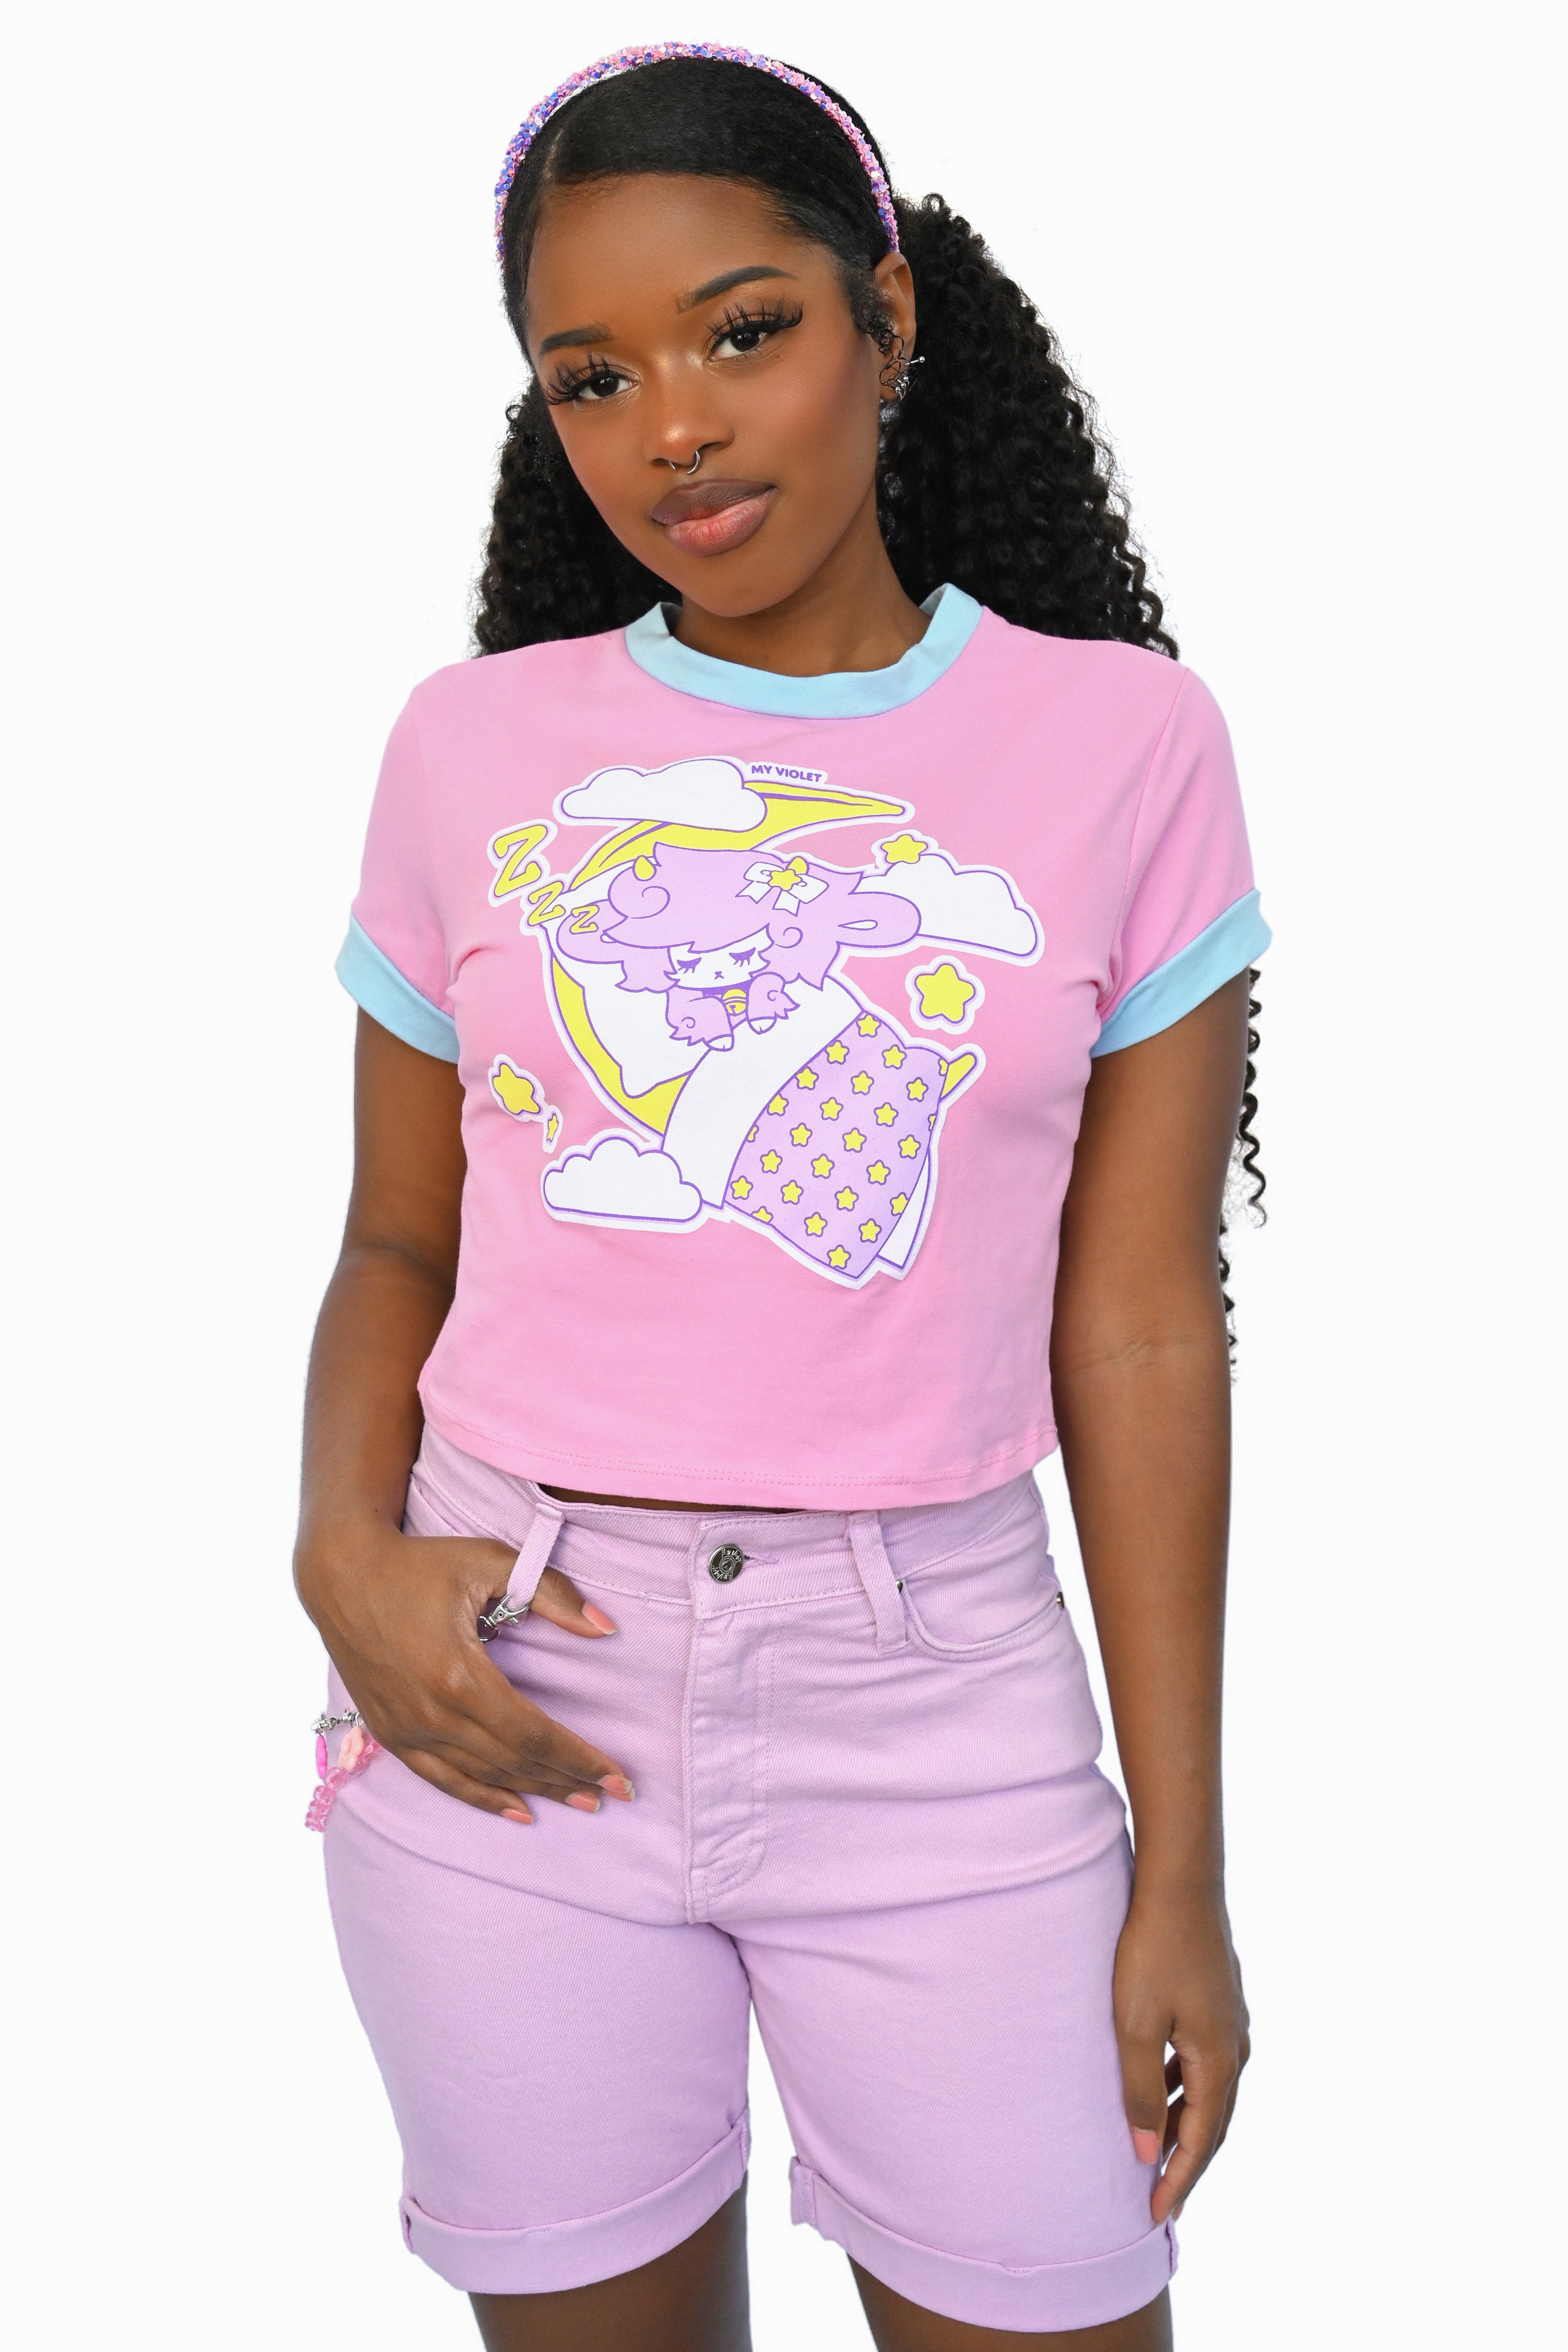 pink cropped tee shirt with pastel blue neck and shoulder hem. Sleepy sheep and moon screen print on the front